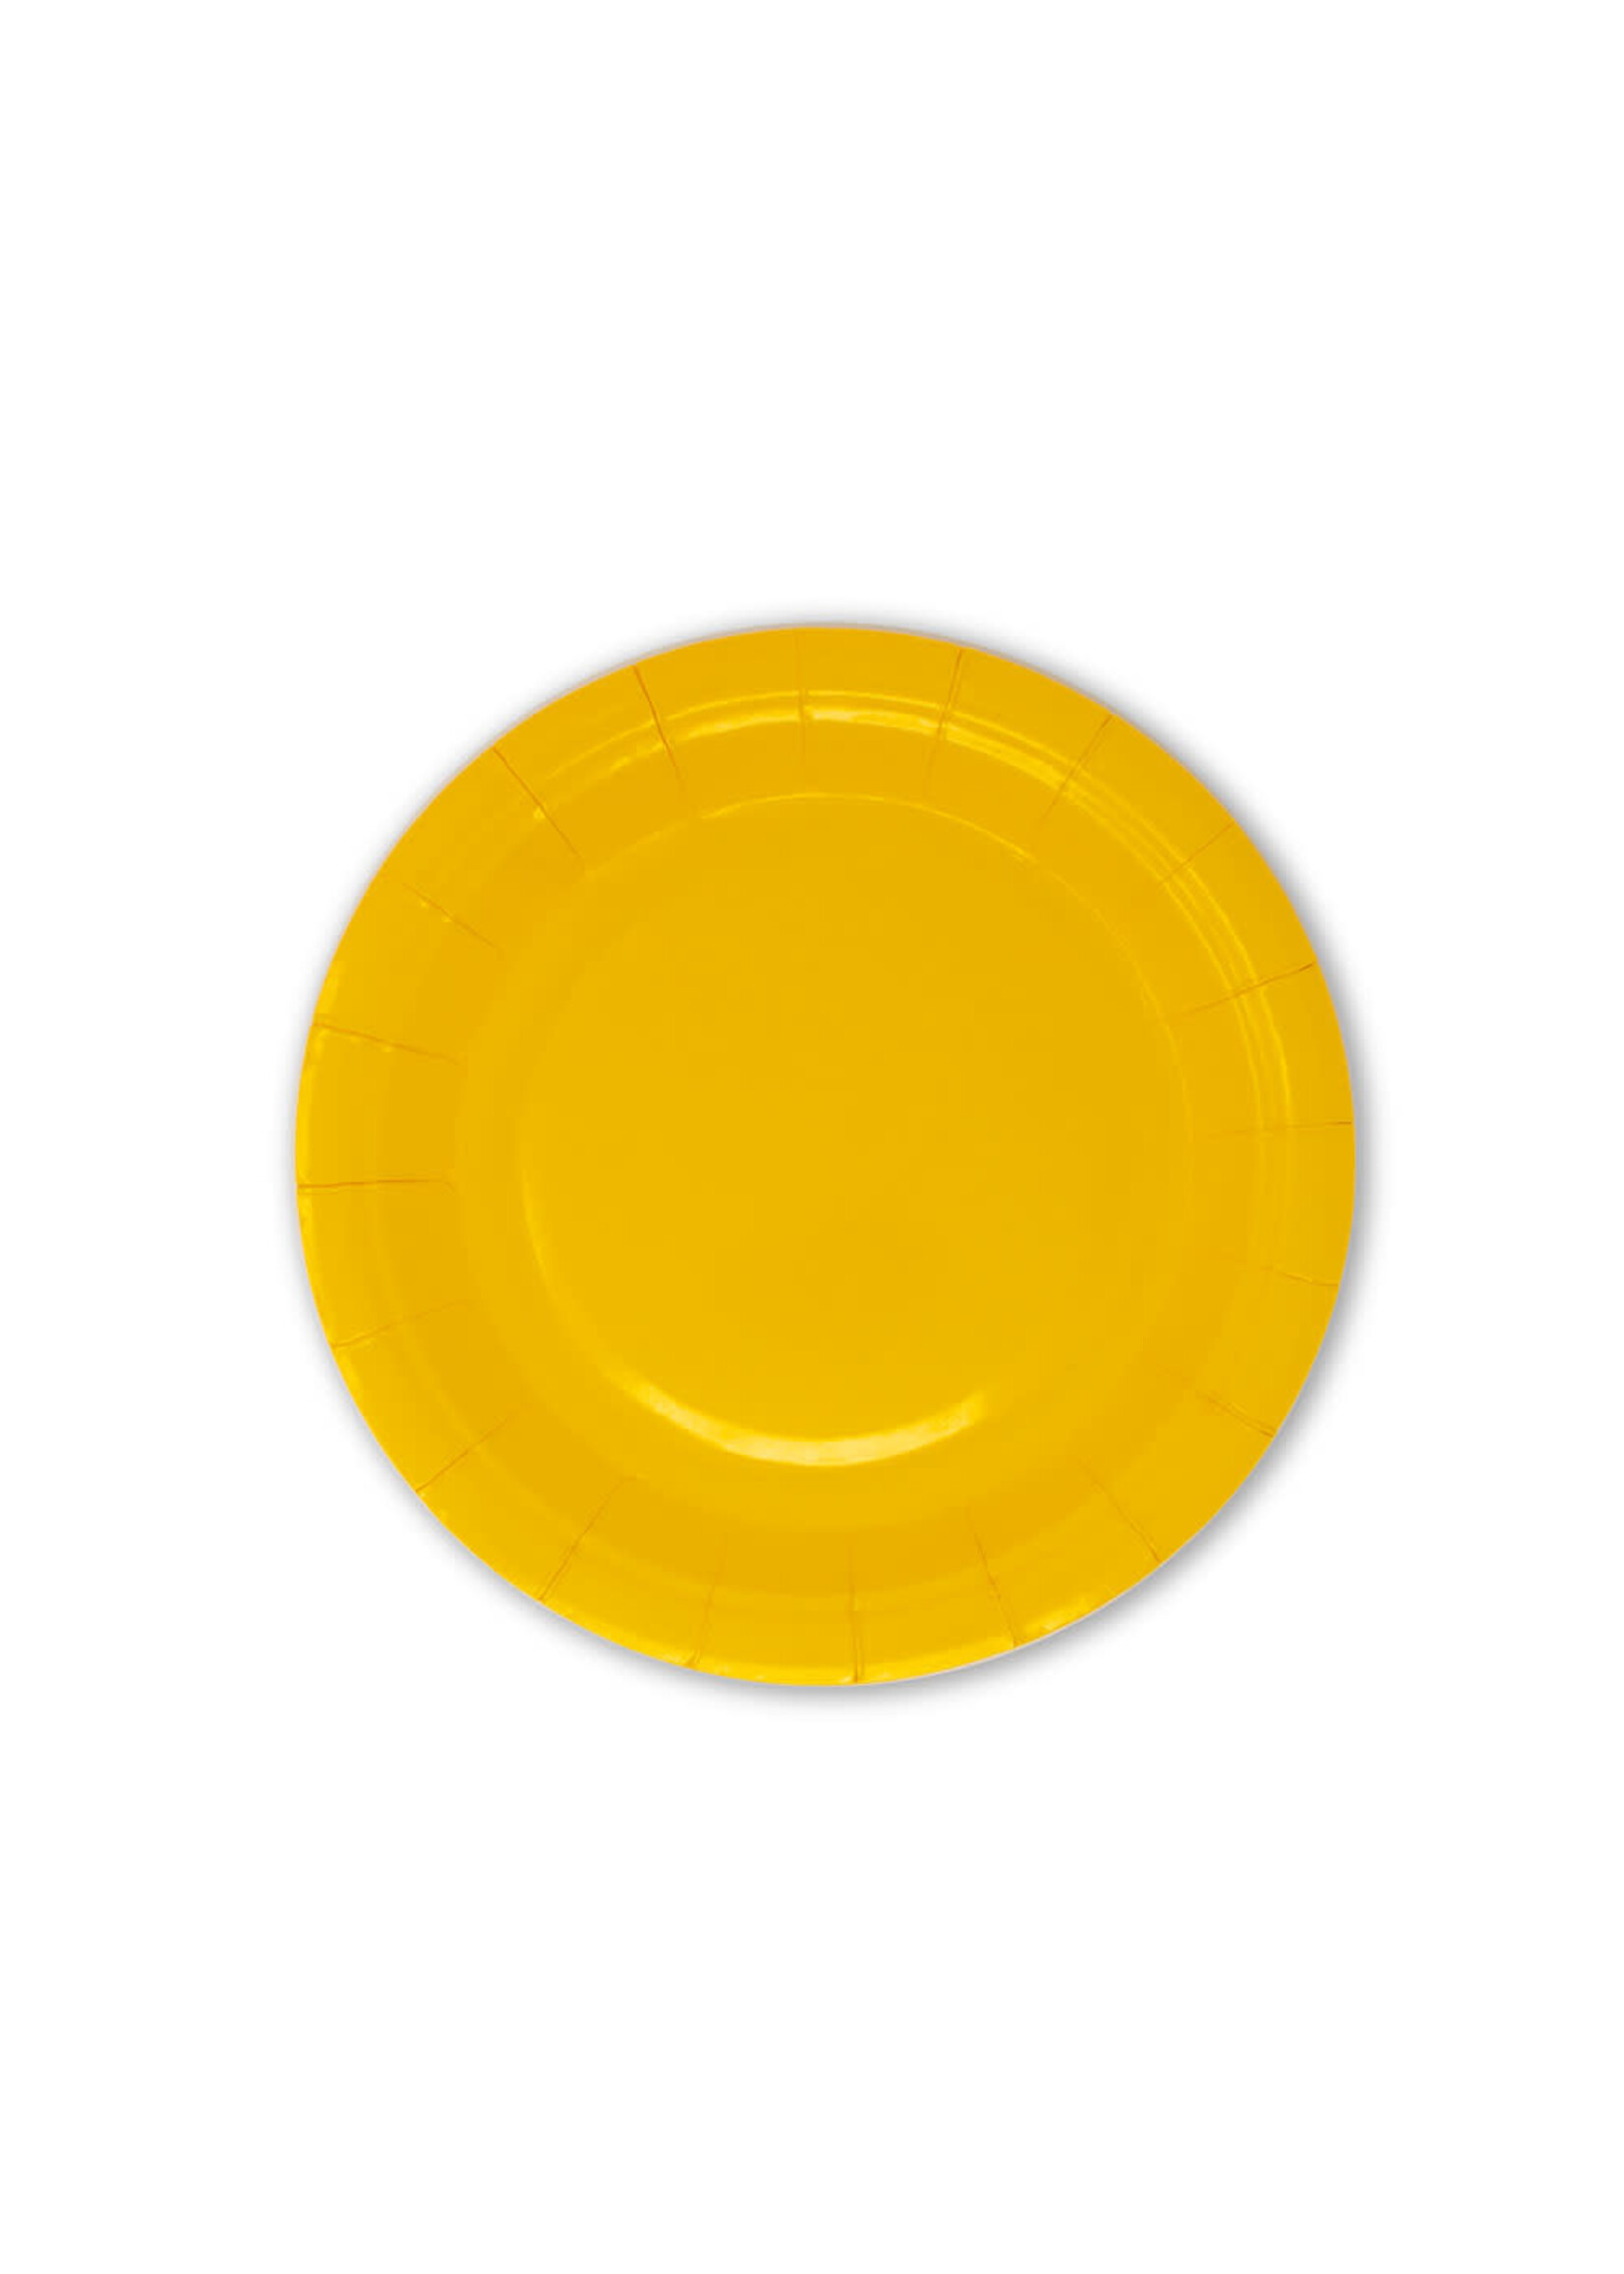 7IN PAPER PLATE 20CT YELLOW